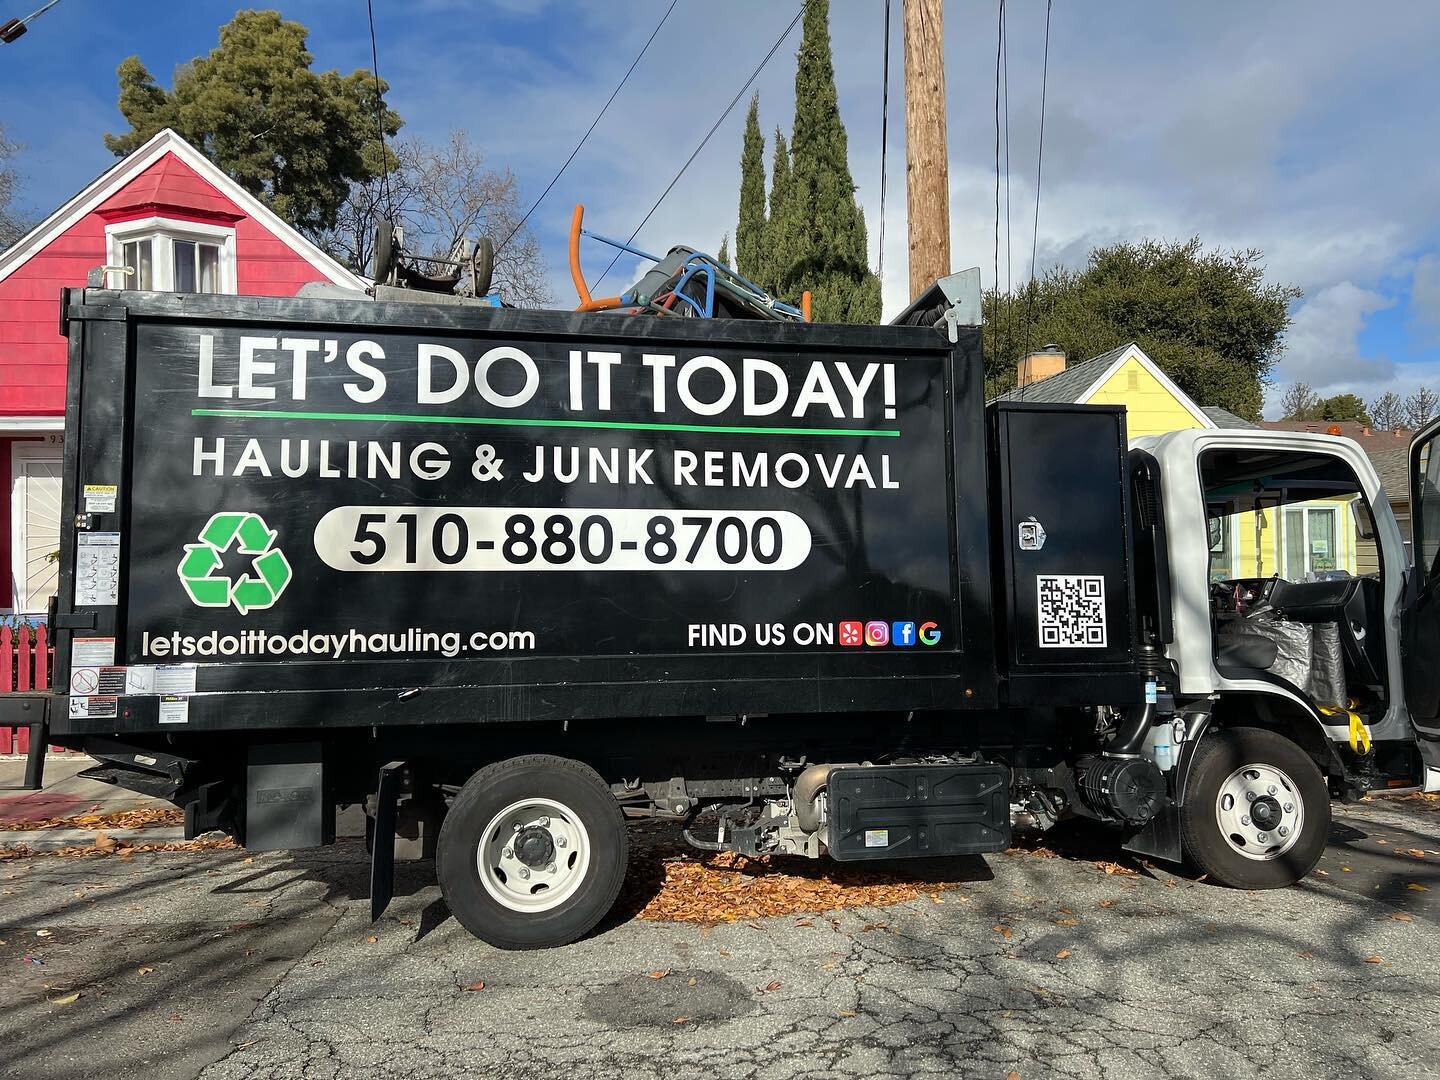 How to Find a Junk Removal Service